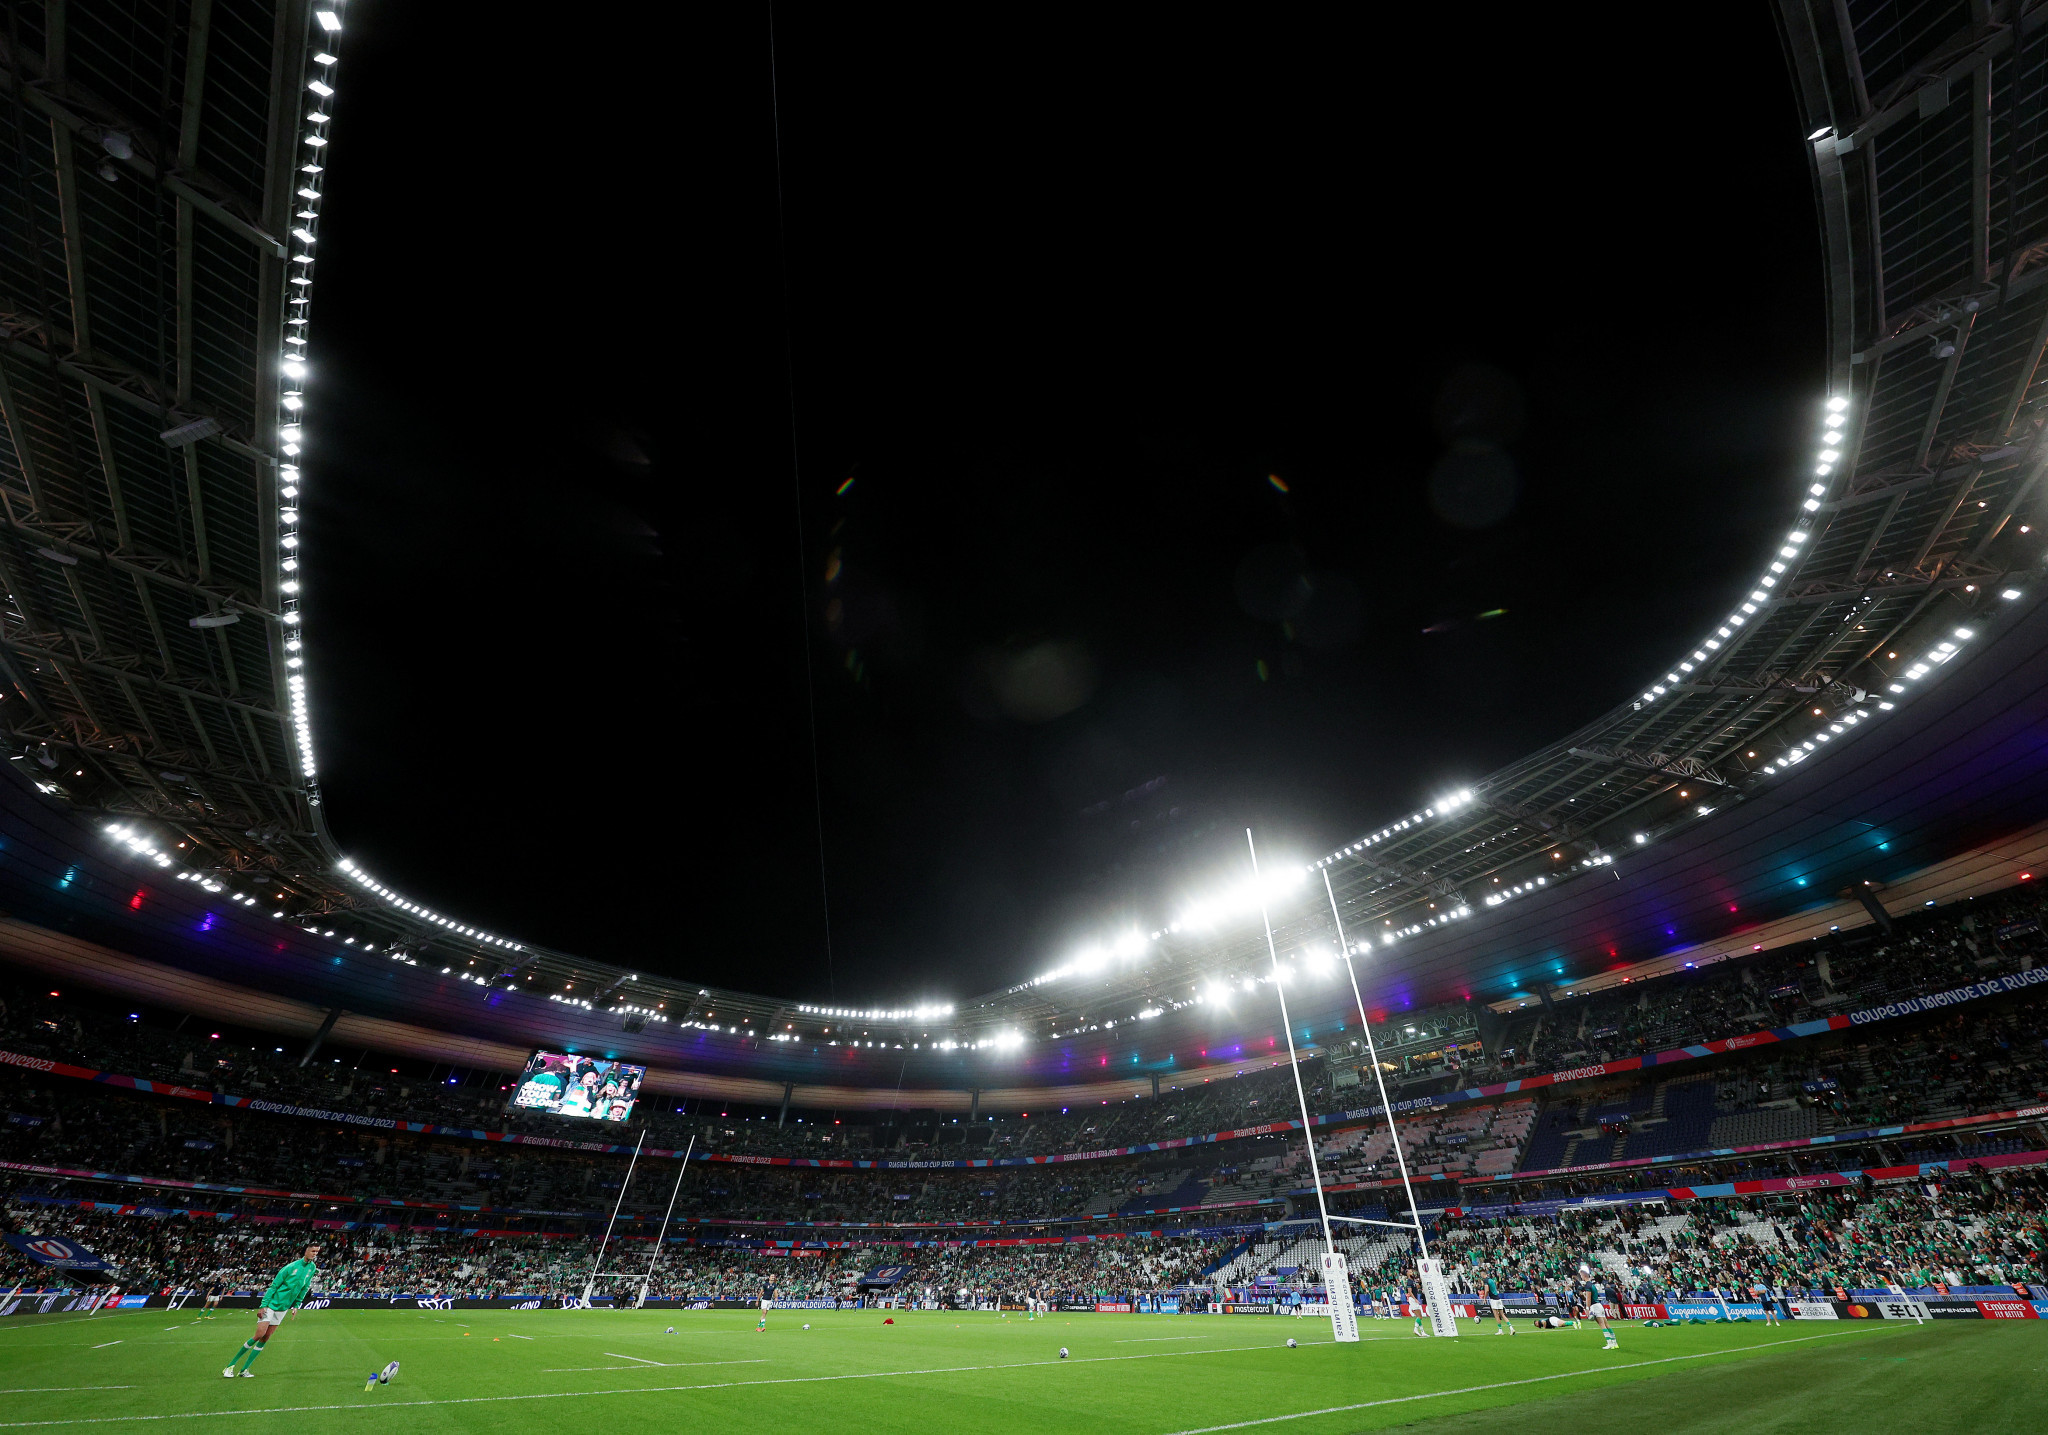 Paris 2024 venue the Stade de France was the host for Ireland's encounter with New Zealand ©Getty Images